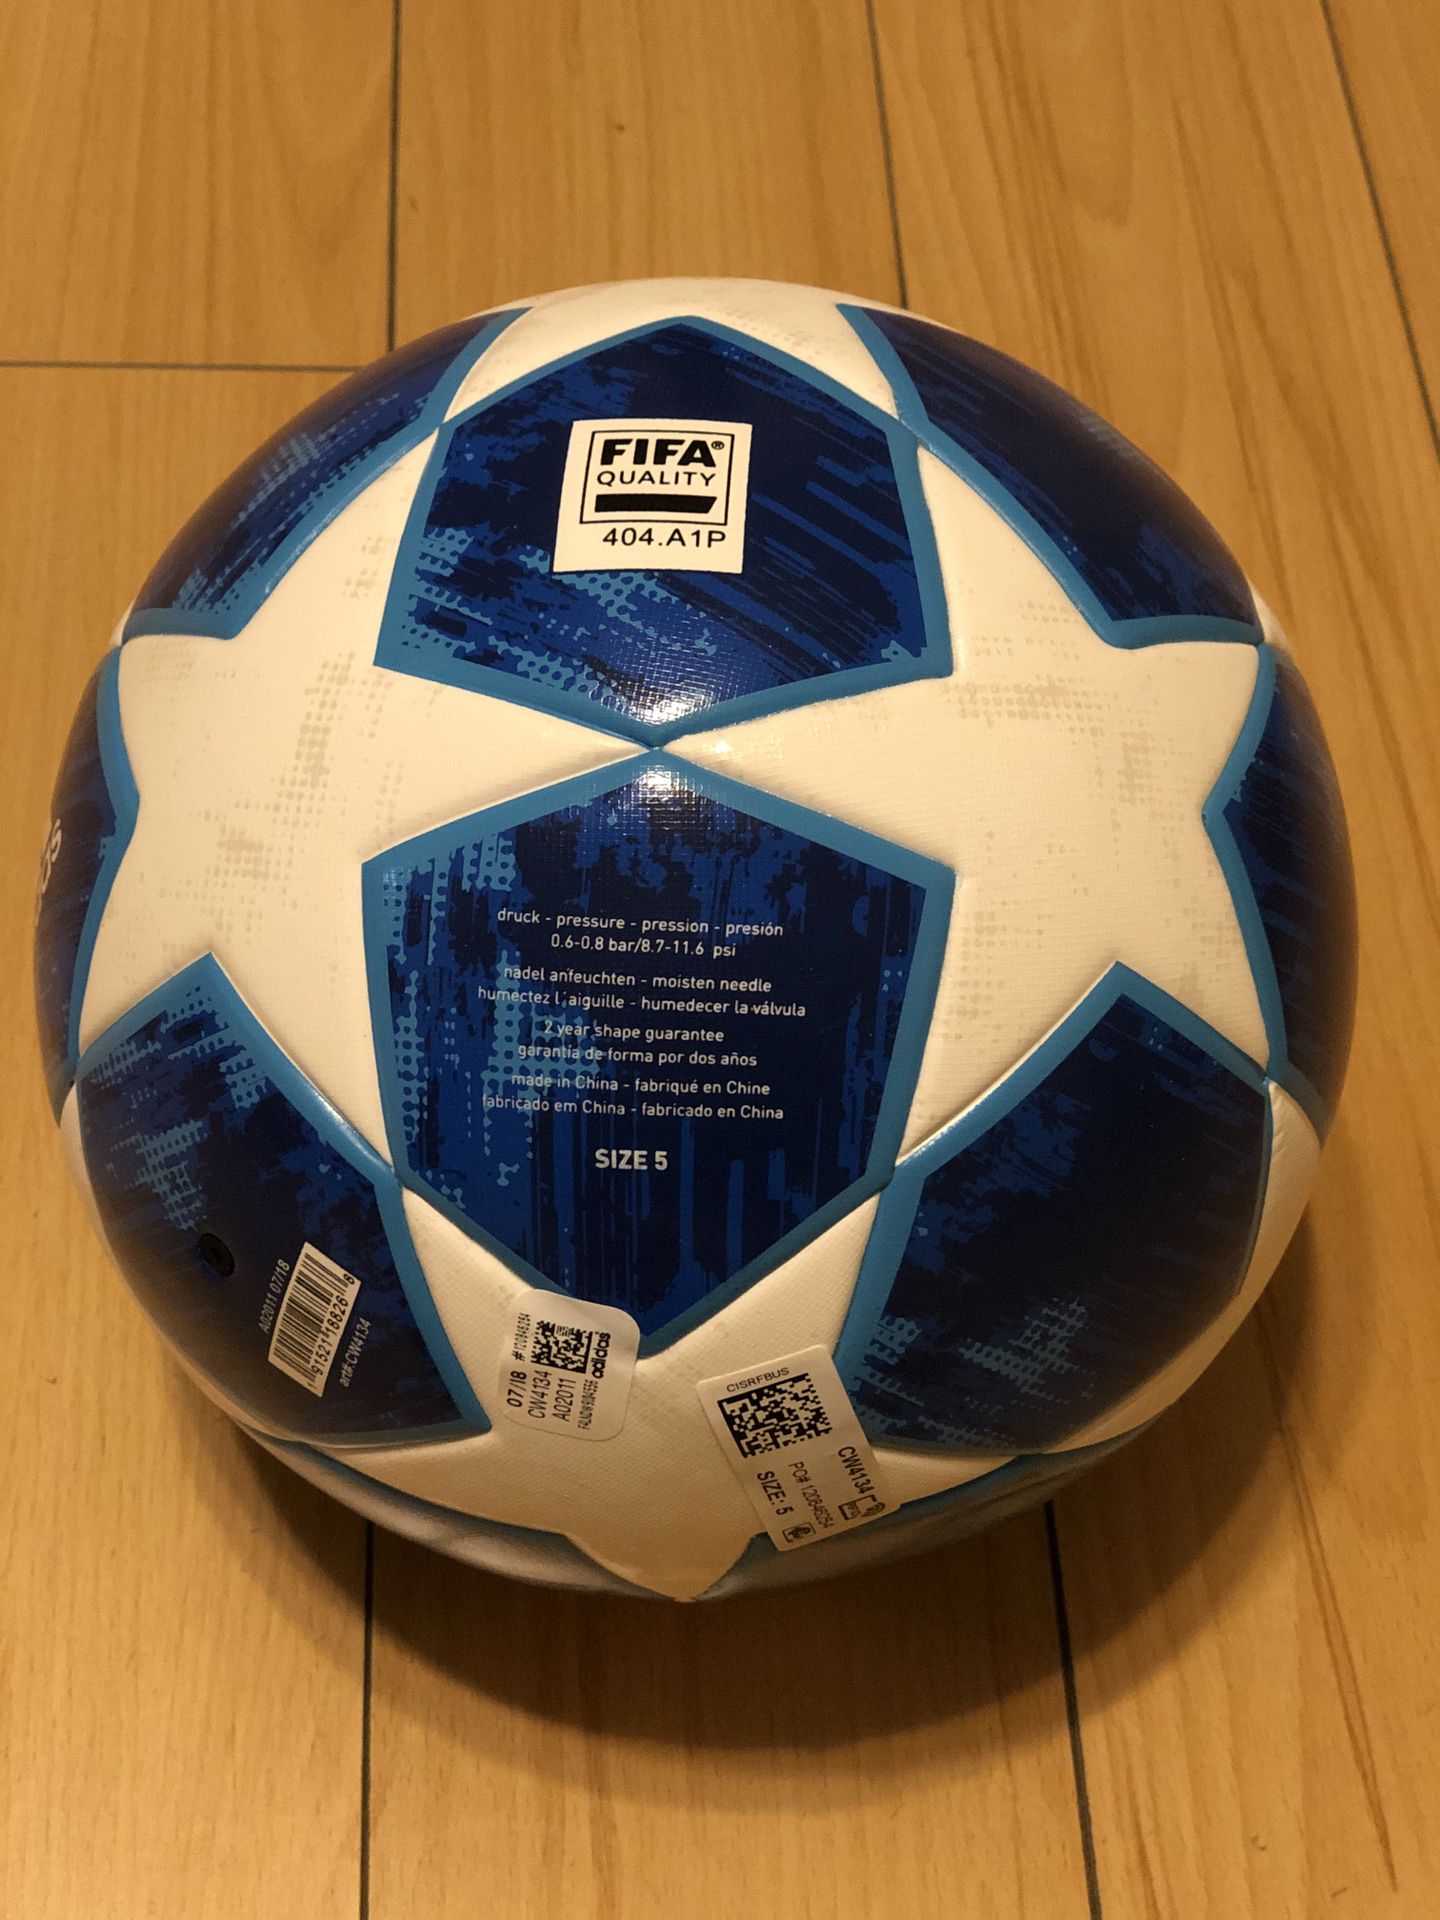 Adidas champions 2019 top training soccer ball size 5 for Sale in Angeles, CA - OfferUp